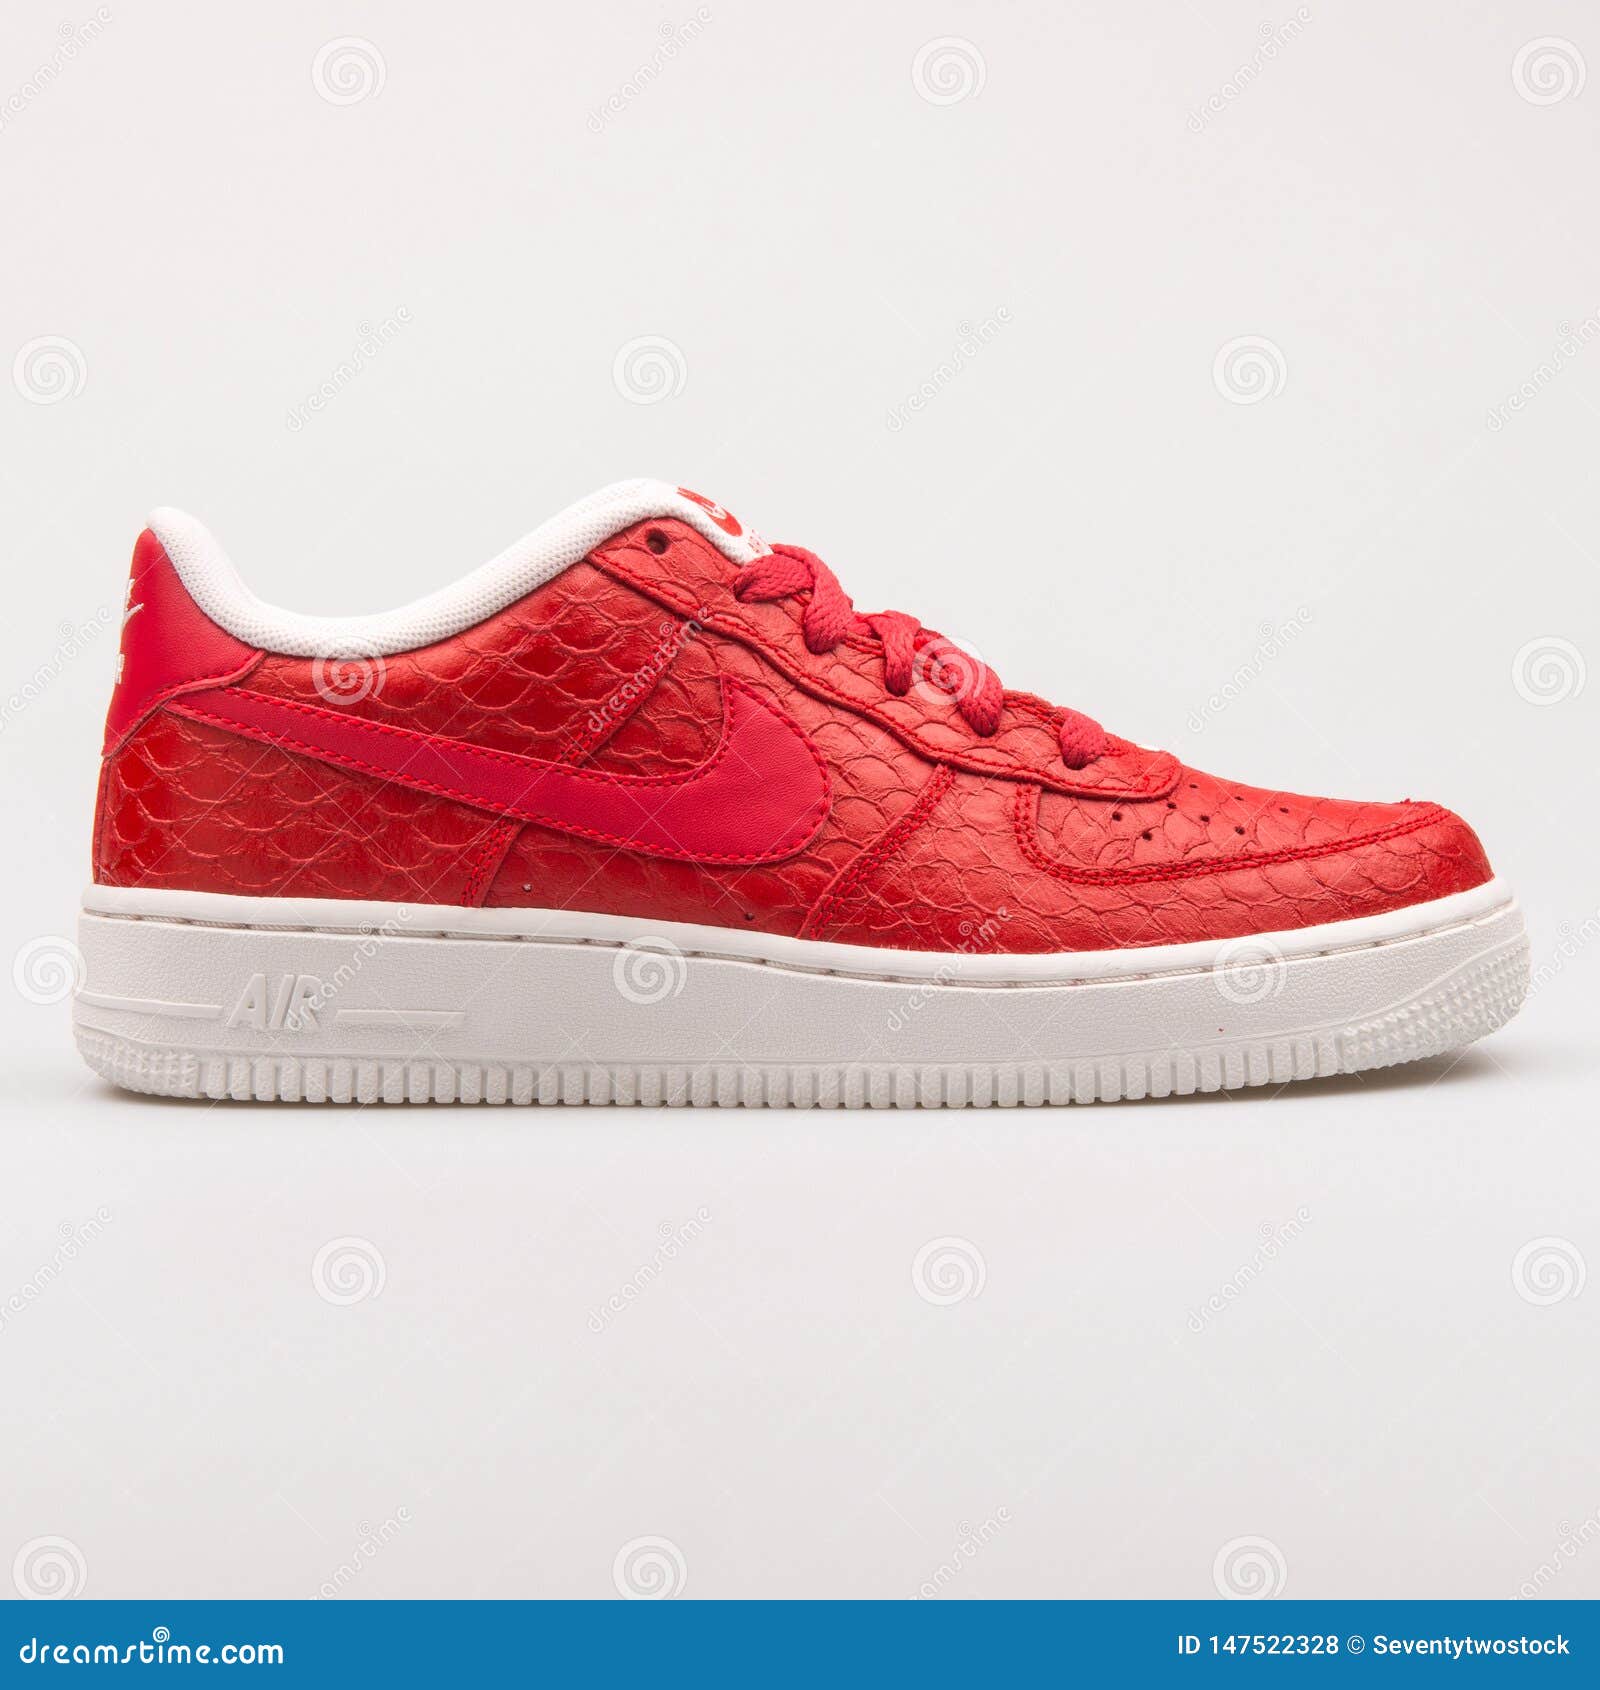 lv air force 1 red